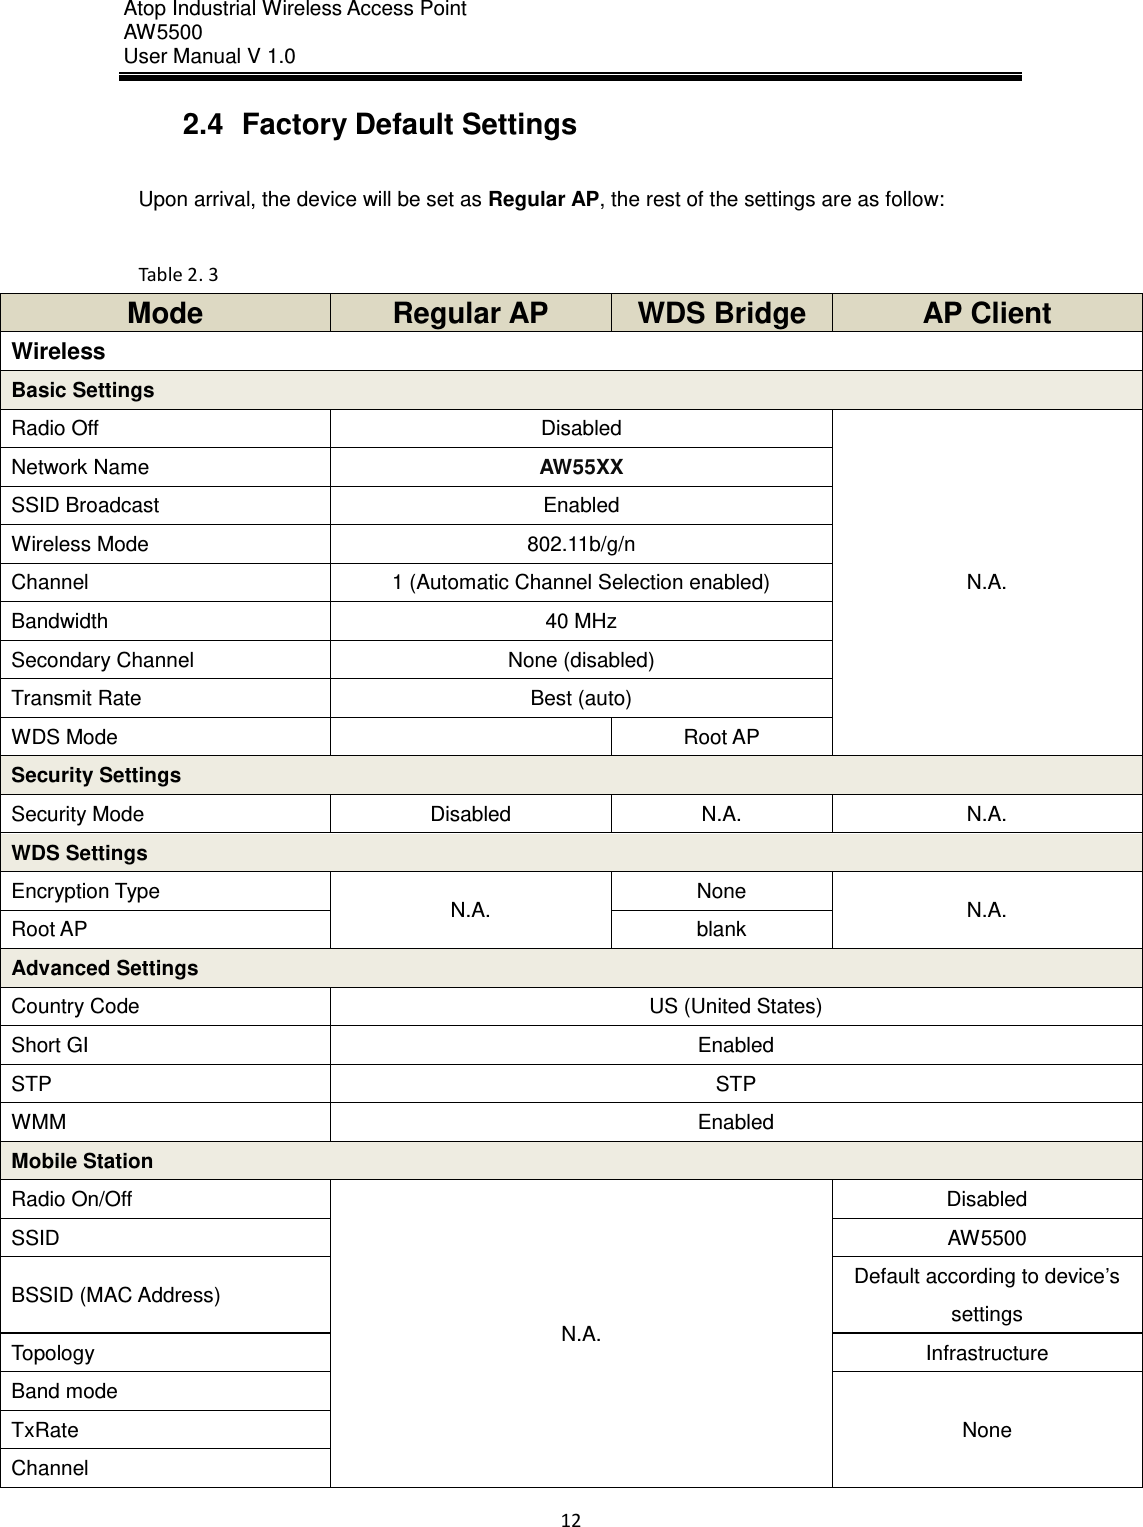 Atop Industrial Wireless Access Point AW 5500 User Manual V 1.0                      12  2.4  Factory Default Settings  Upon arrival, the device will be set as Regular AP, the rest of the settings are as follow:  Table 2. 3 Mode Regular AP WDS Bridge AP Client Wireless Basic Settings Radio Off Disabled N.A. Network Name AW55XX SSID Broadcast Enabled Wireless Mode 802.11b/g/n Channel 1 (Automatic Channel Selection enabled) Bandwidth 40 MHz Secondary Channel None (disabled) Transmit Rate Best (auto) WDS Mode  Root AP Security Settings Security Mode Disabled N.A. N.A. WDS Settings   Encryption Type N.A. None N.A. Root AP blank Advanced Settings Country Code US (United States) Short GI Enabled STP STP WMM Enabled Mobile Station Radio On/Off N.A. Disabled SSID AW5500 BSSID (MAC Address) Default according to device’s settings Topology Infrastructure Band mode None TxRate Channel 